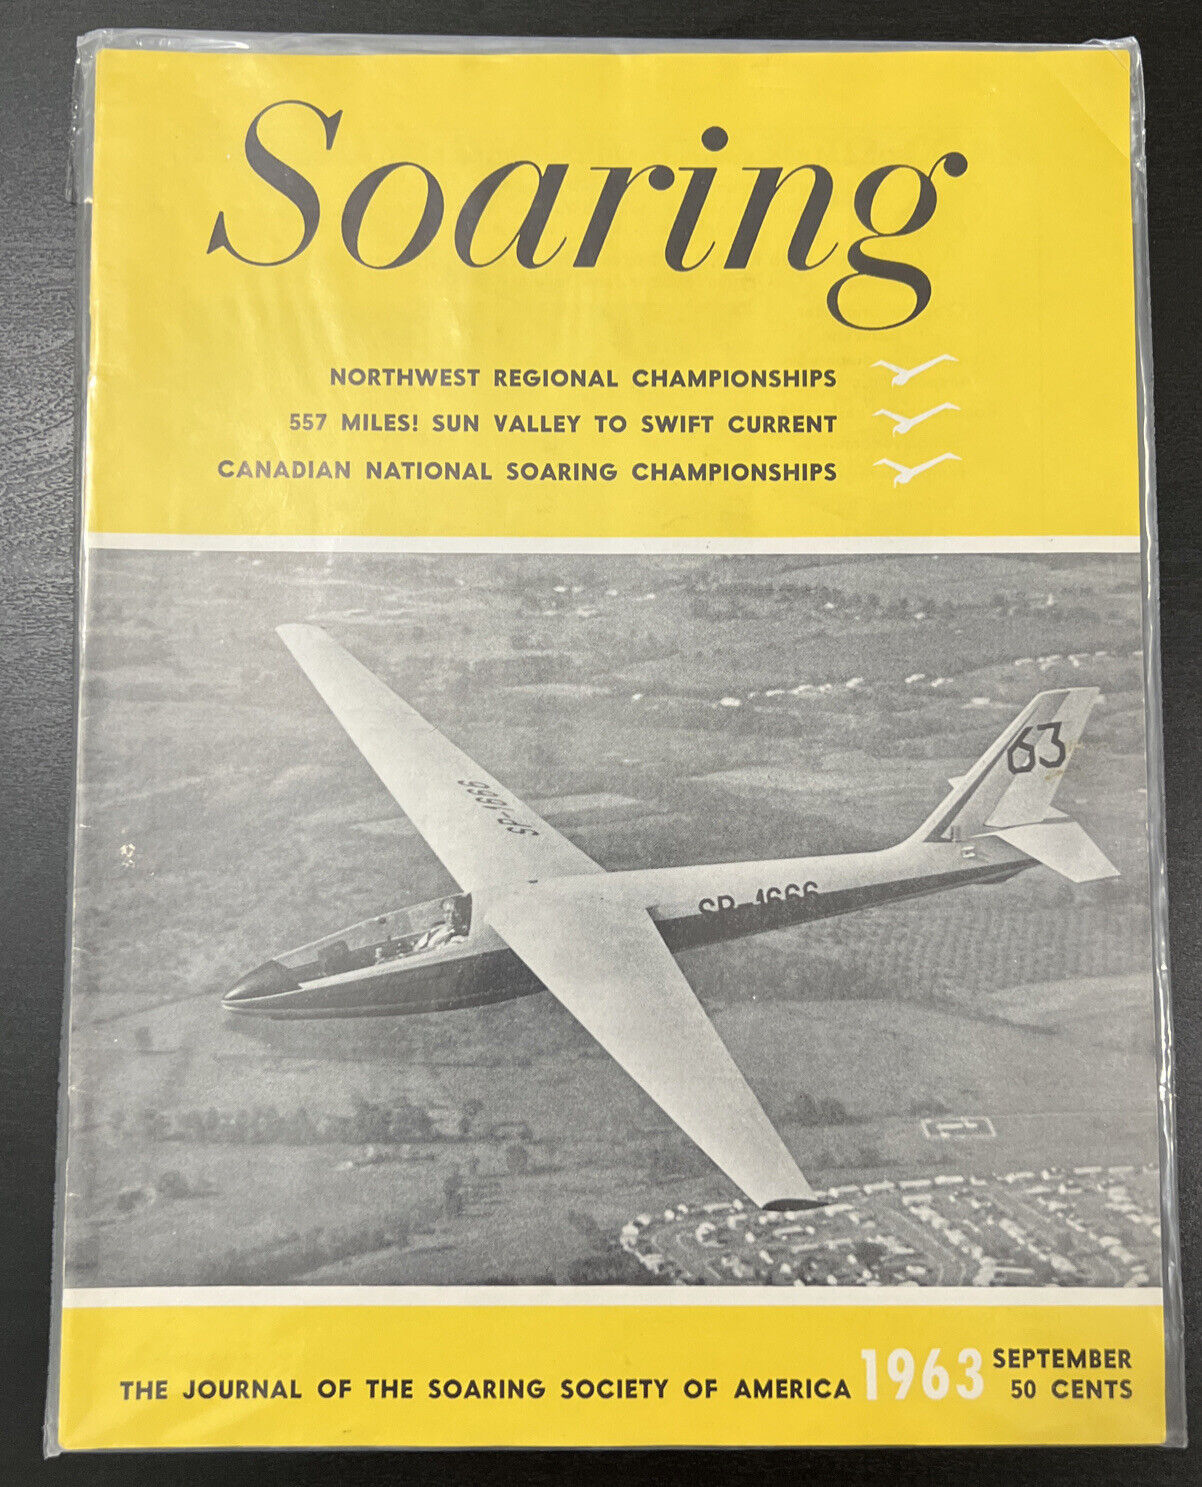 Vintage Sept 1963 Journal of the Soaring Society of America Soaring Magazine